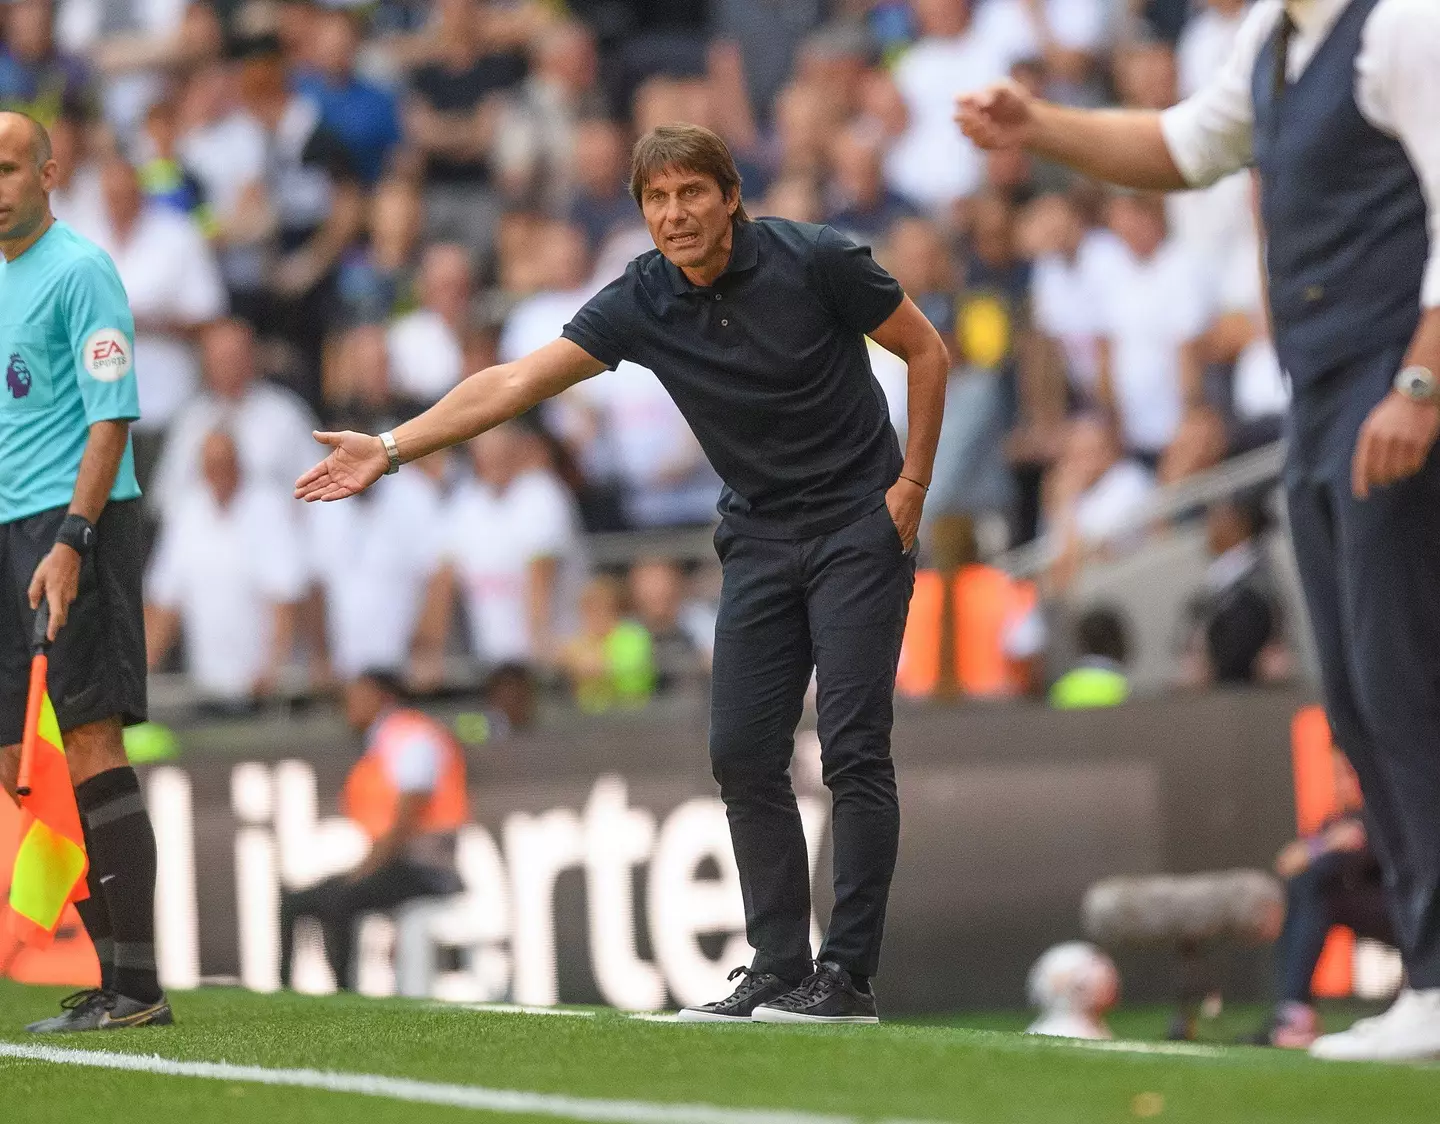 Tottenham Manager Antonio Conte during the match against Southampton. (Alamy)